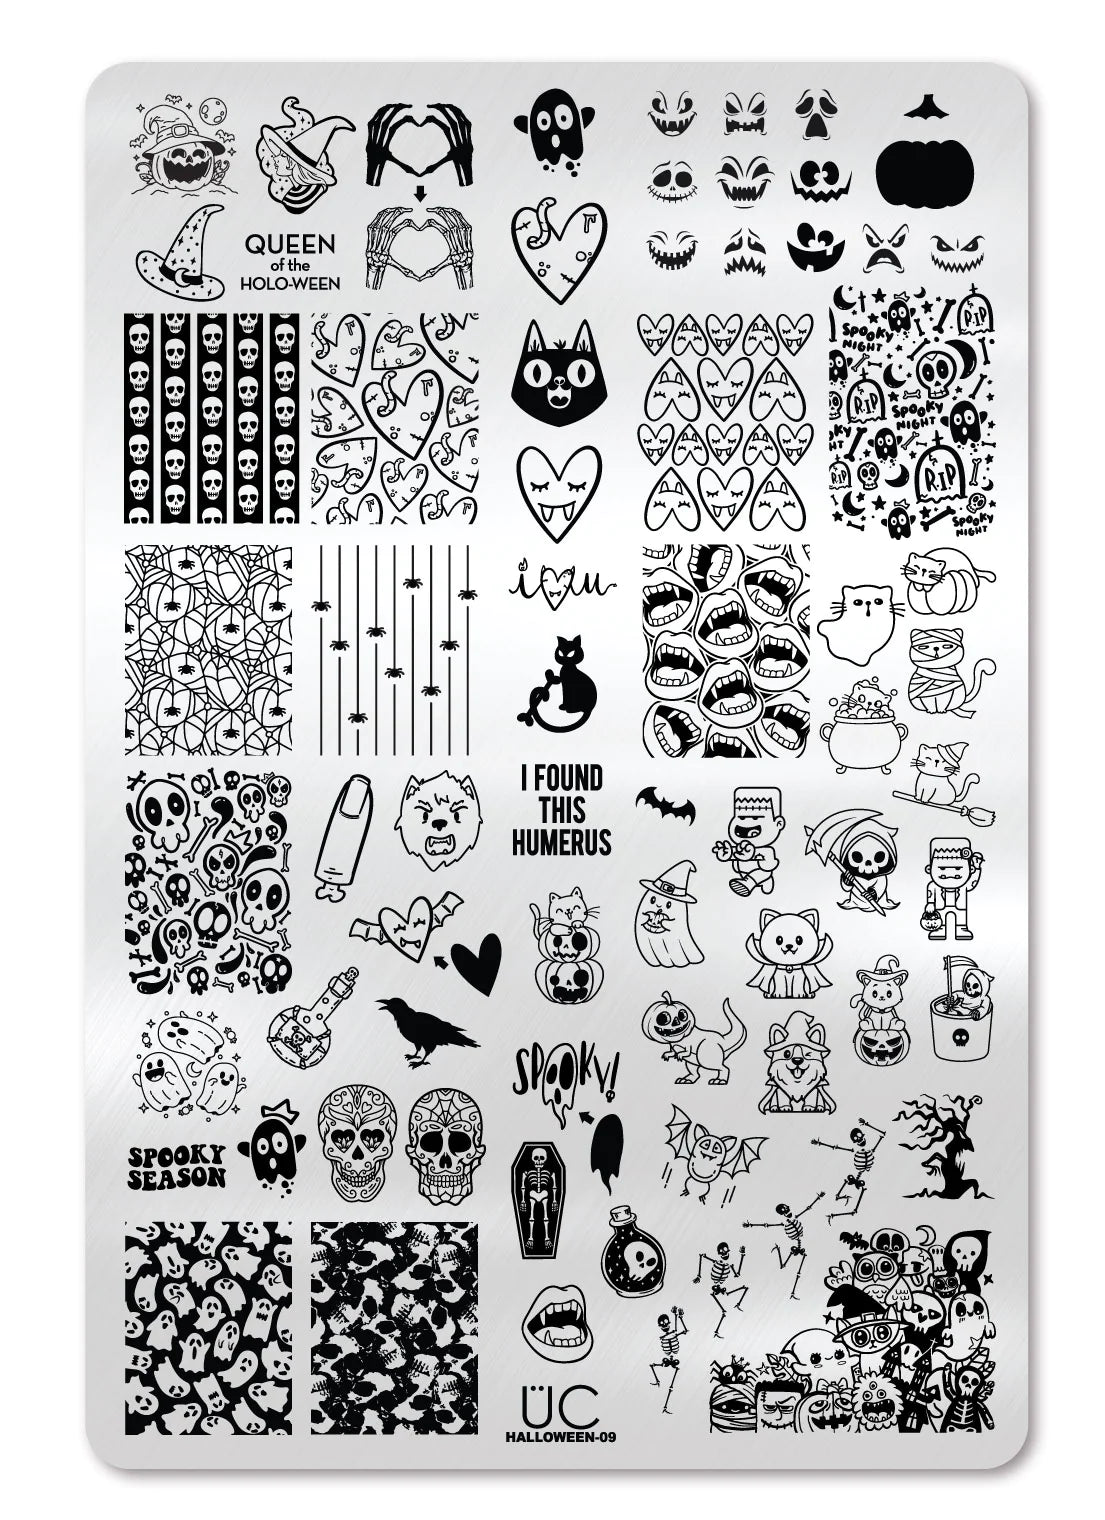 Halloween-09 - Stamping Plate